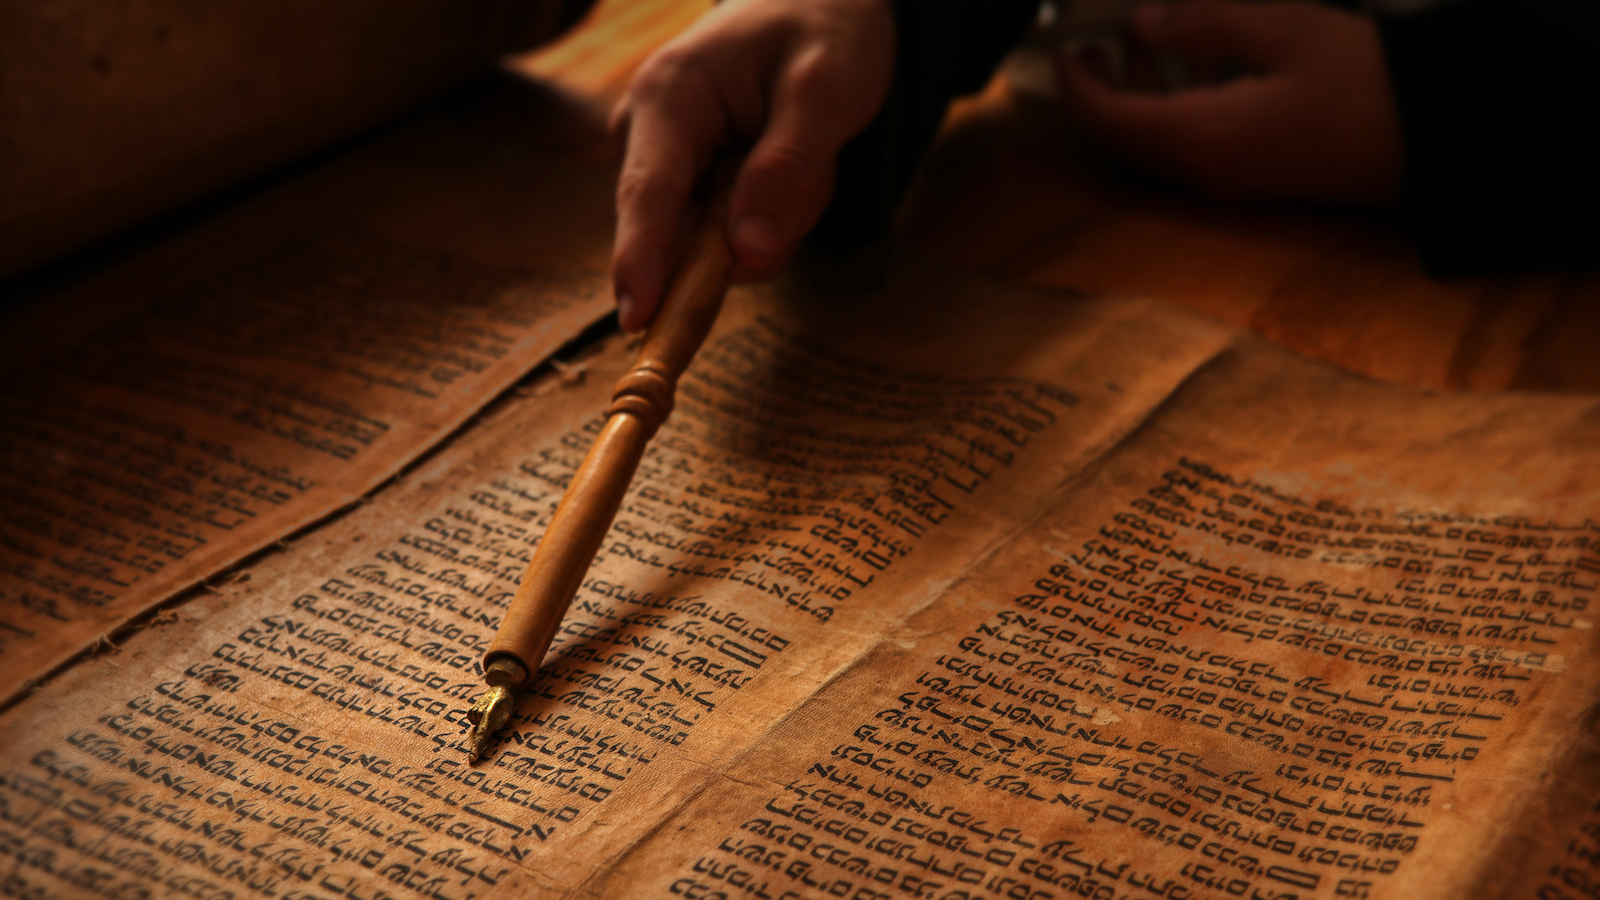 Article about What the Torah Teaches Us